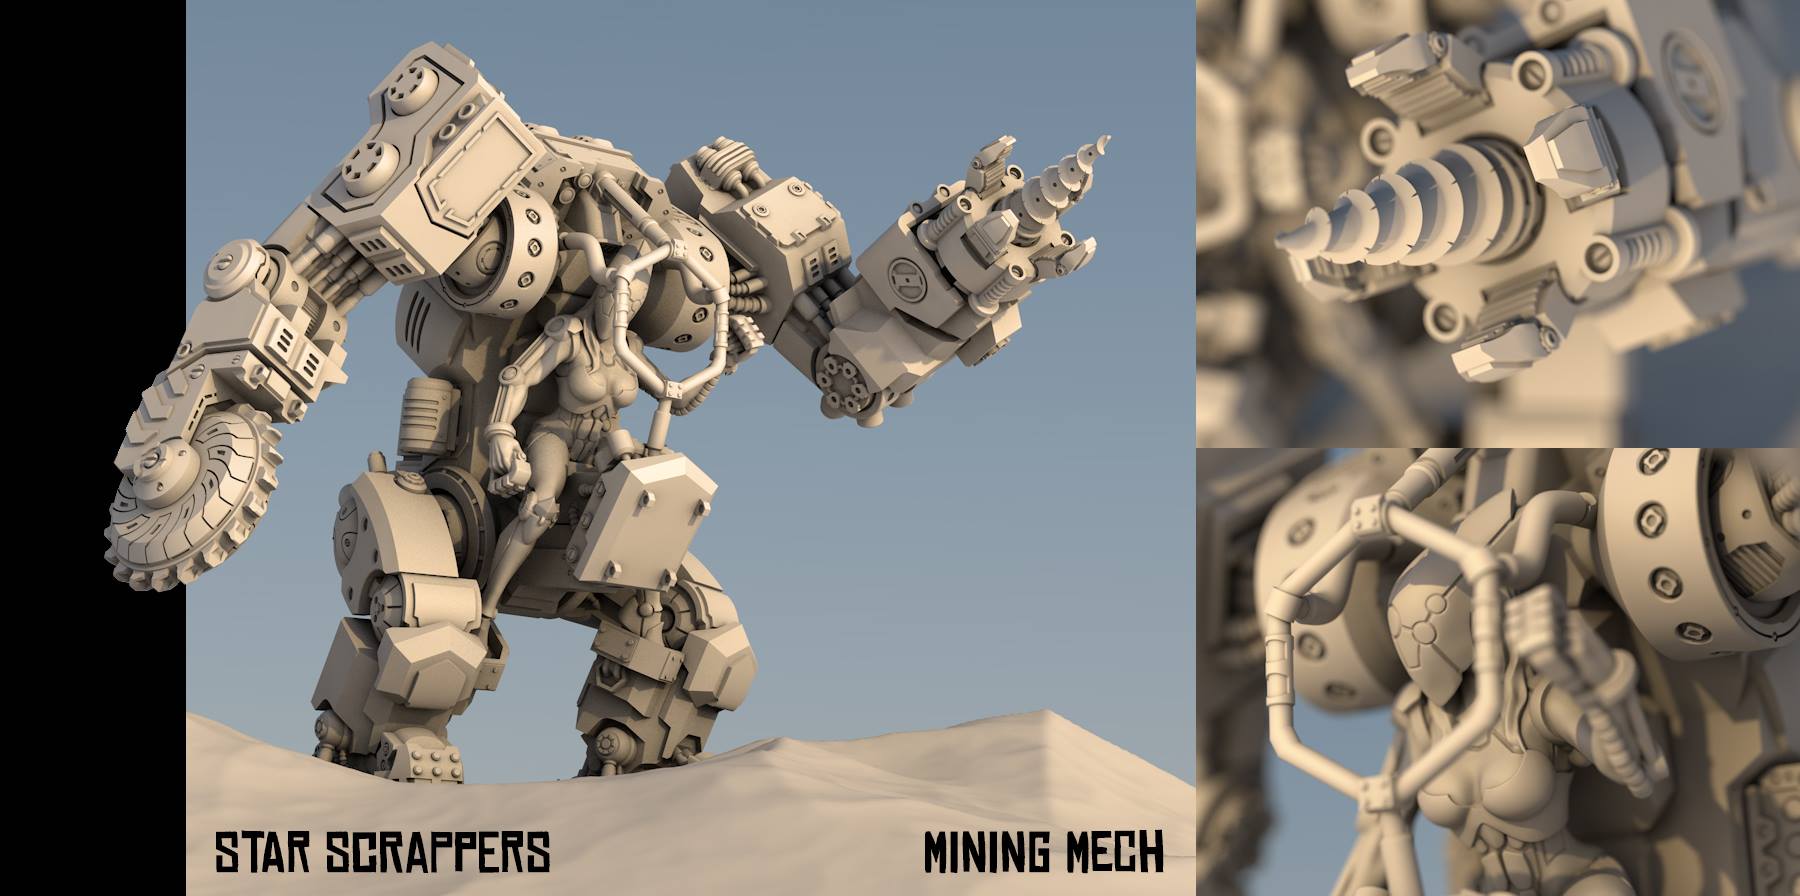 Biosses are here! New Star Scrappers minis from Hexy.